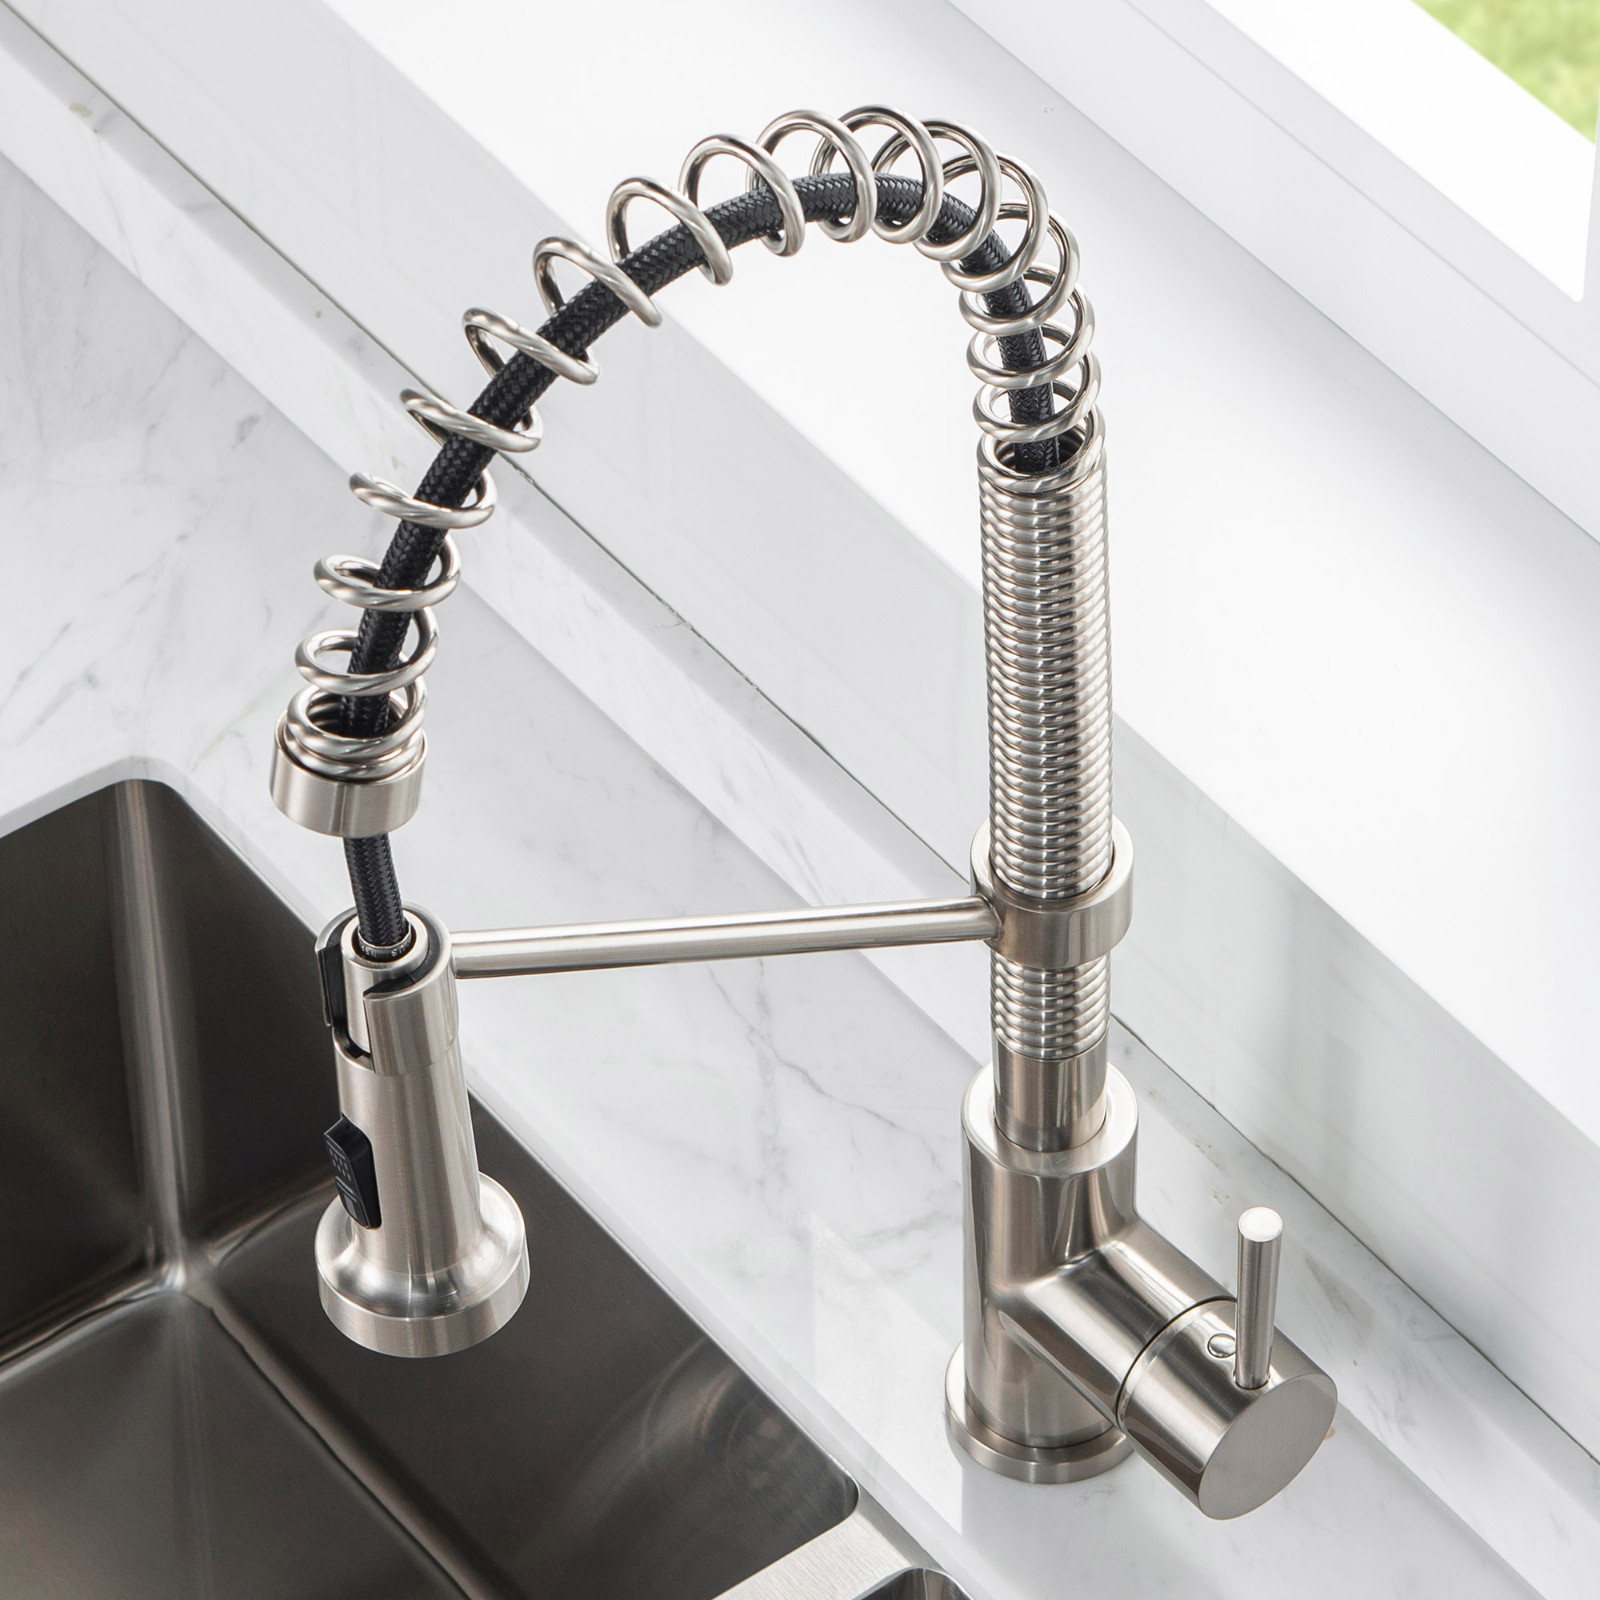  WOODBRIDGE WK010203BN Stainless Steel Single Handle Spring Coil Pre-Rinse Kitchen Faucet with Pull Down Sprayer, Brushed Nickel Finish_9480